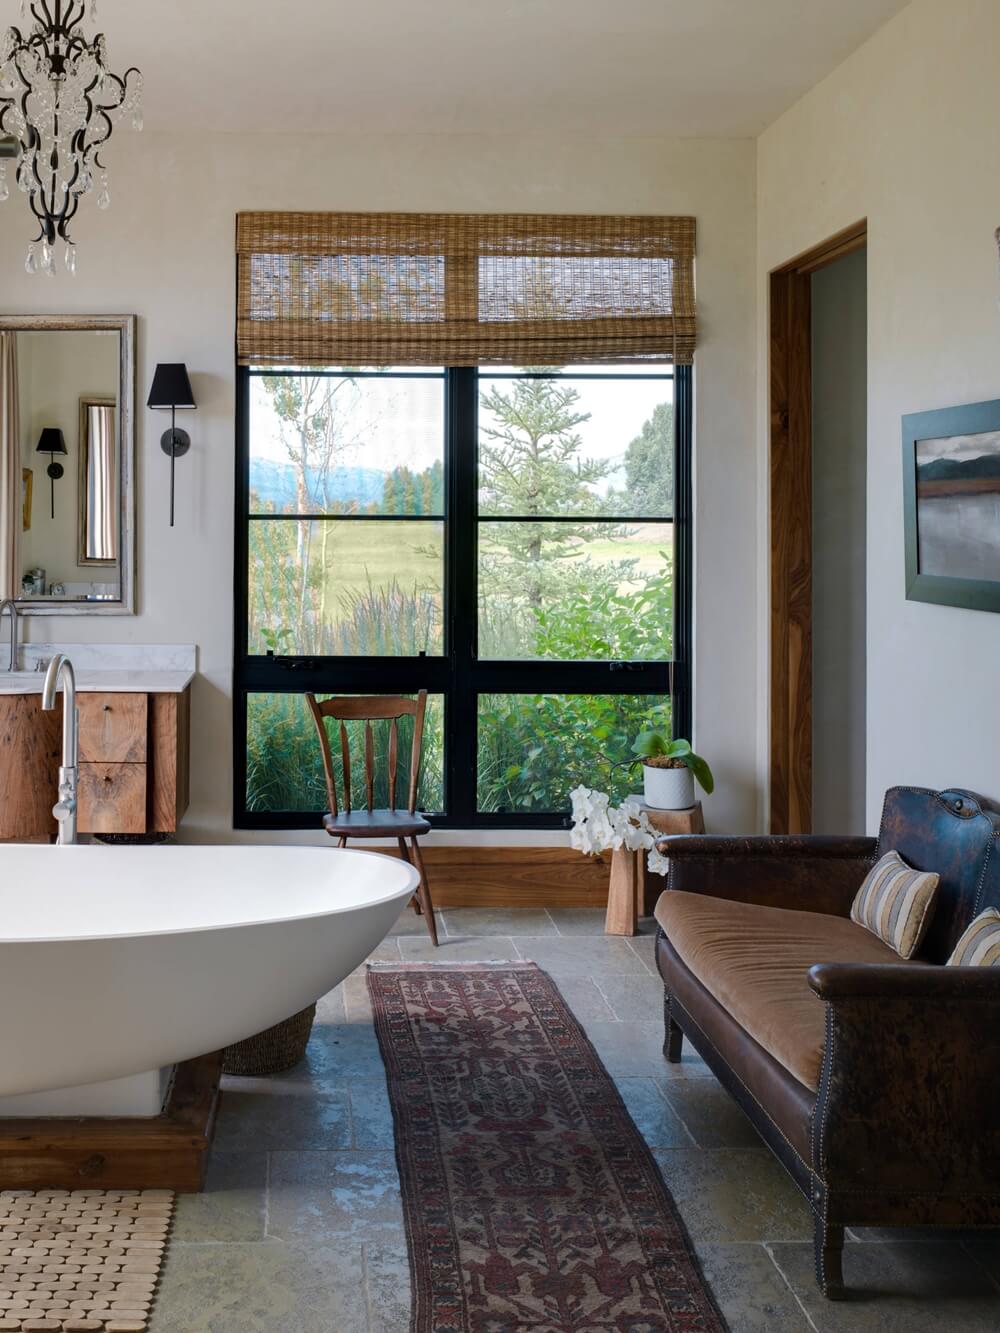 10 Features for a Spa Like Bathroom 